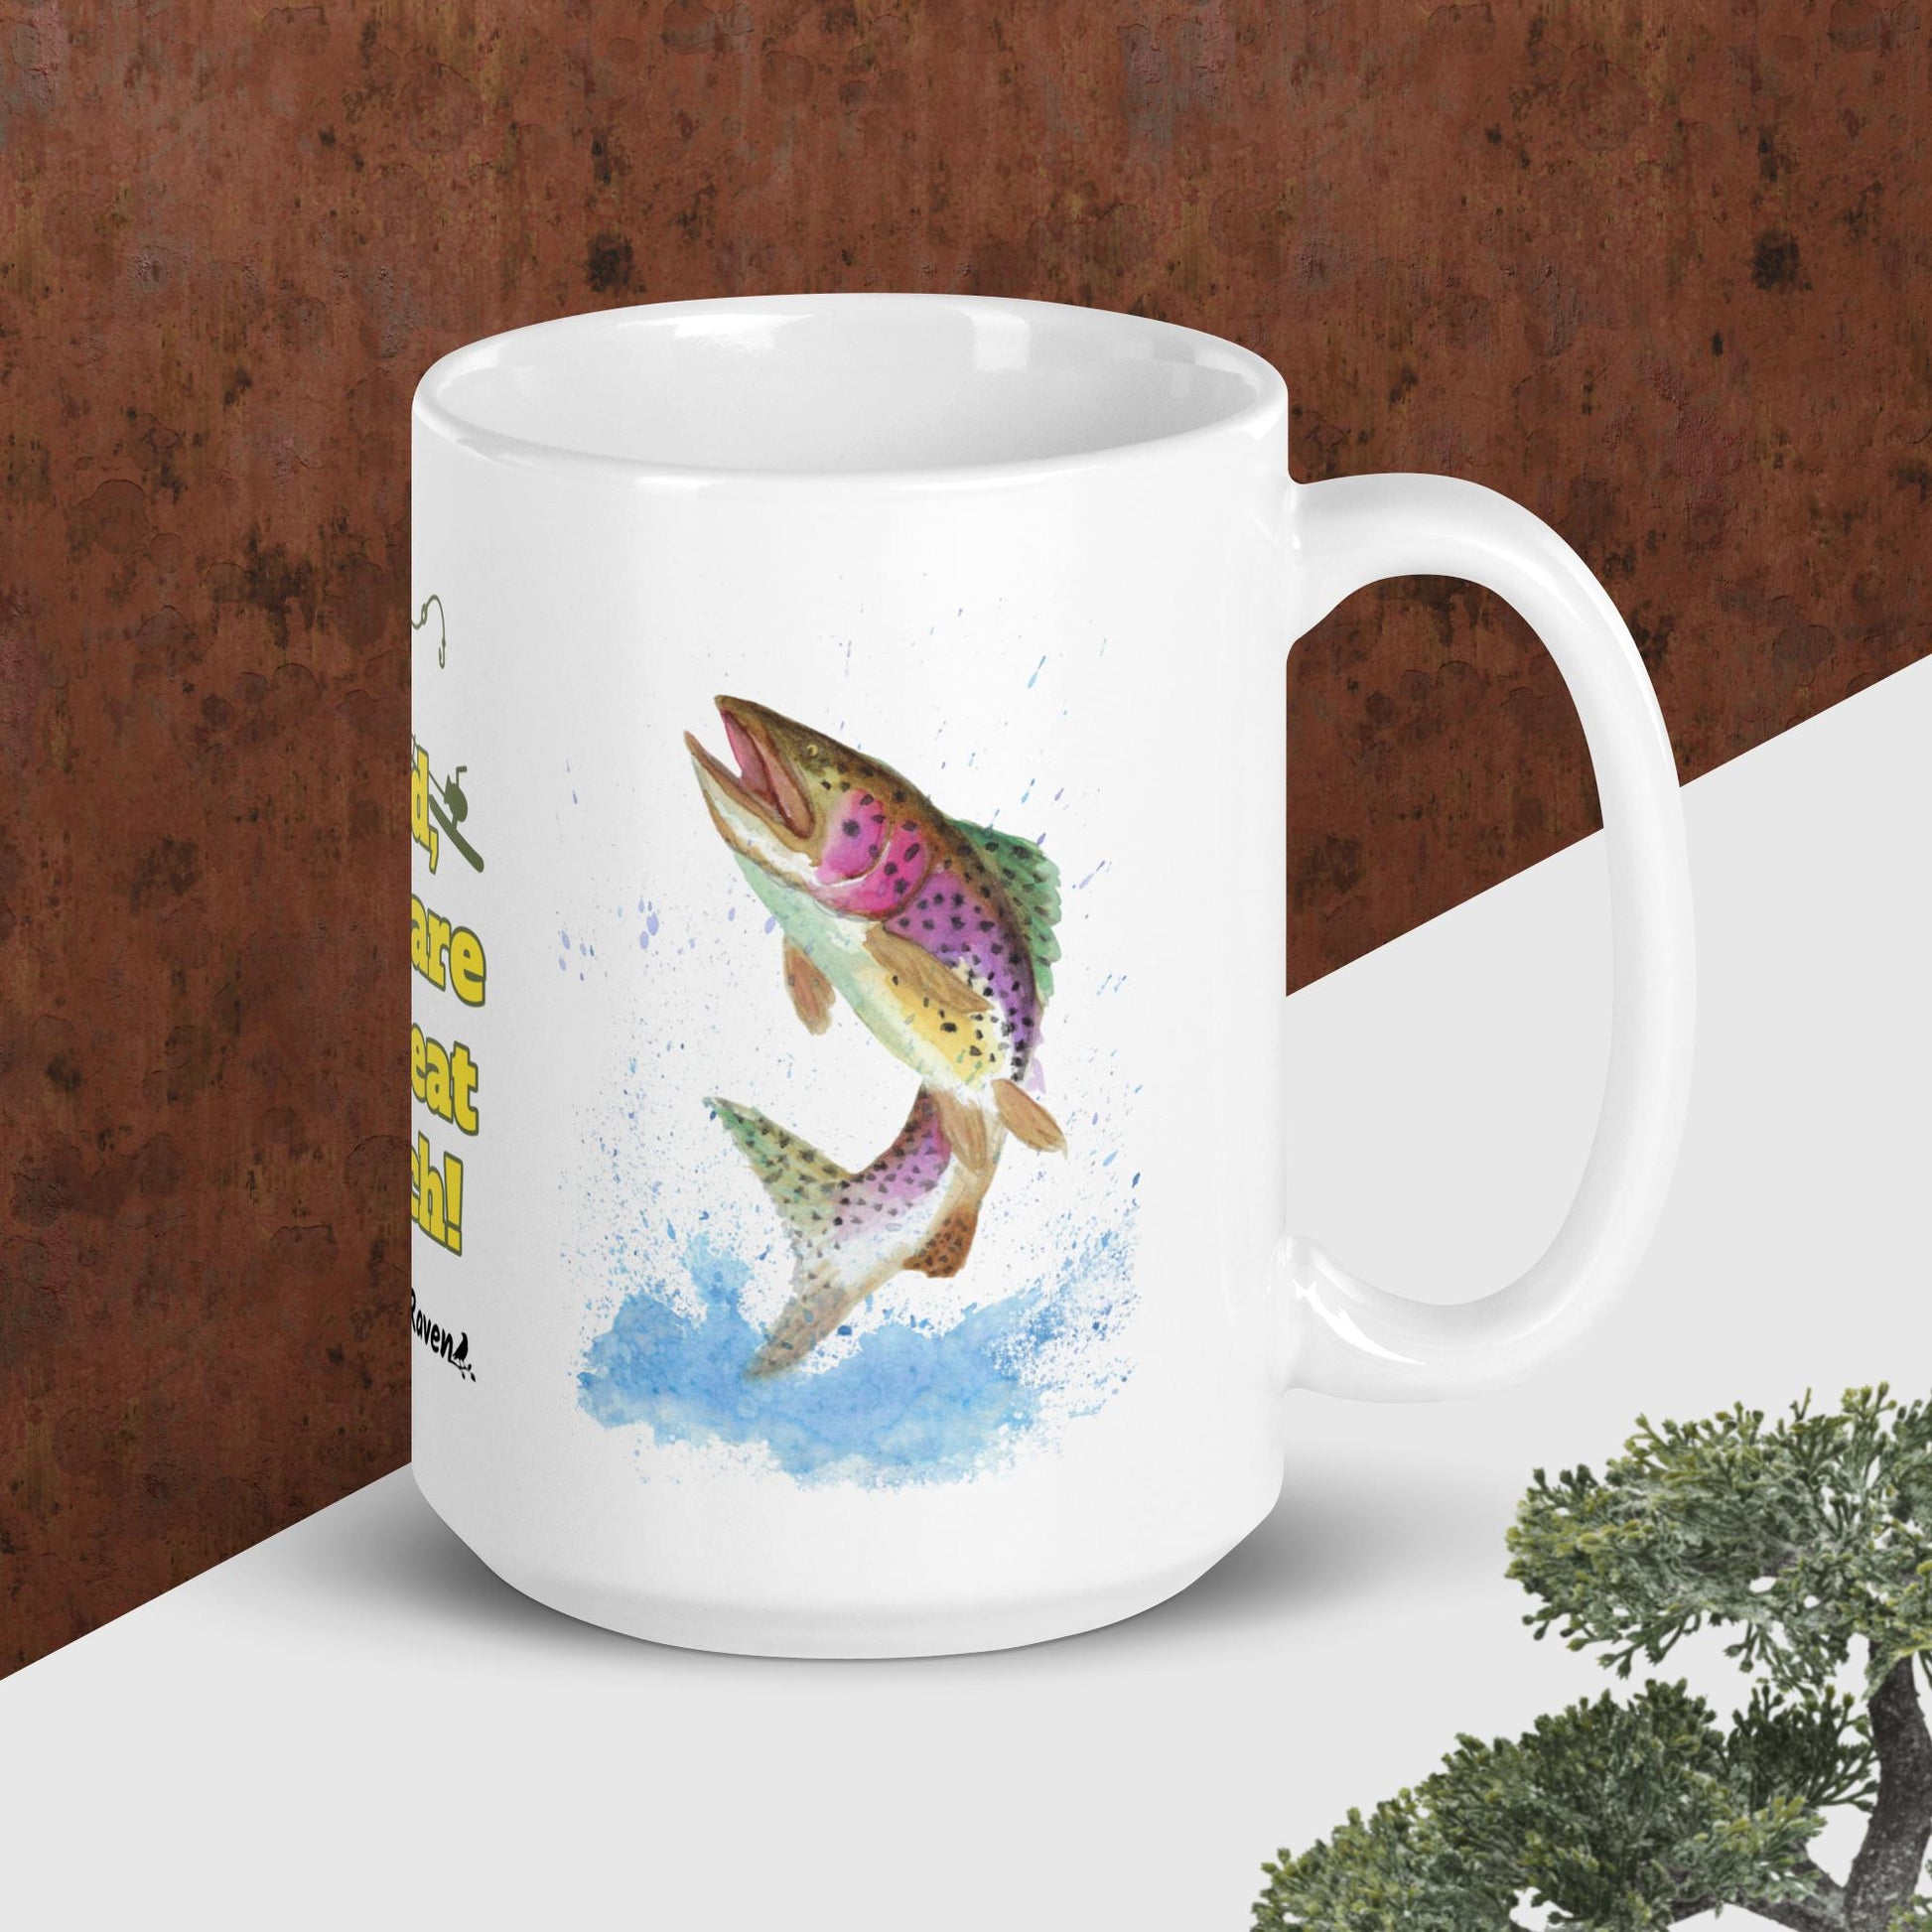 15 ounce ceramic mug. Features watercolor print of a rainbow trout and a largemouth bass with text that says: Dad, you are a great catch! Shown on tabletop with handle facing right.